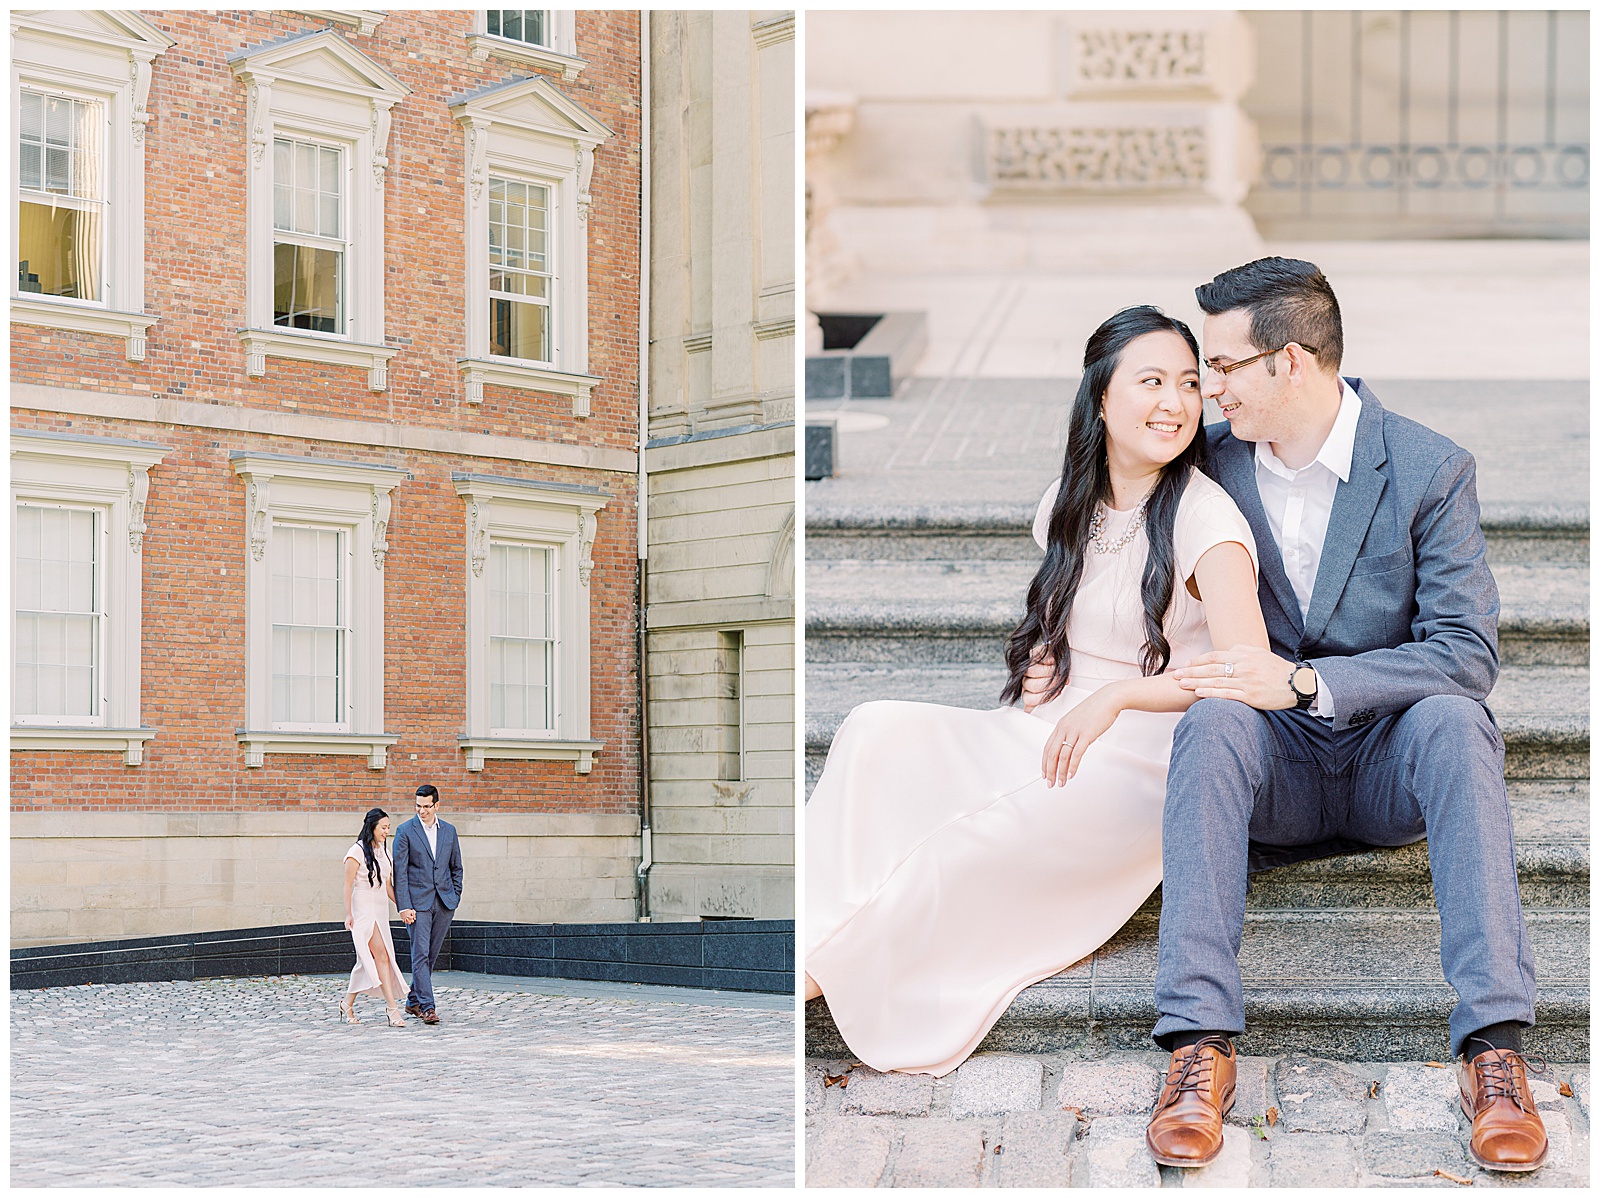 Osgoode Hall Summer Engagement Session - Couple sitting on stairs